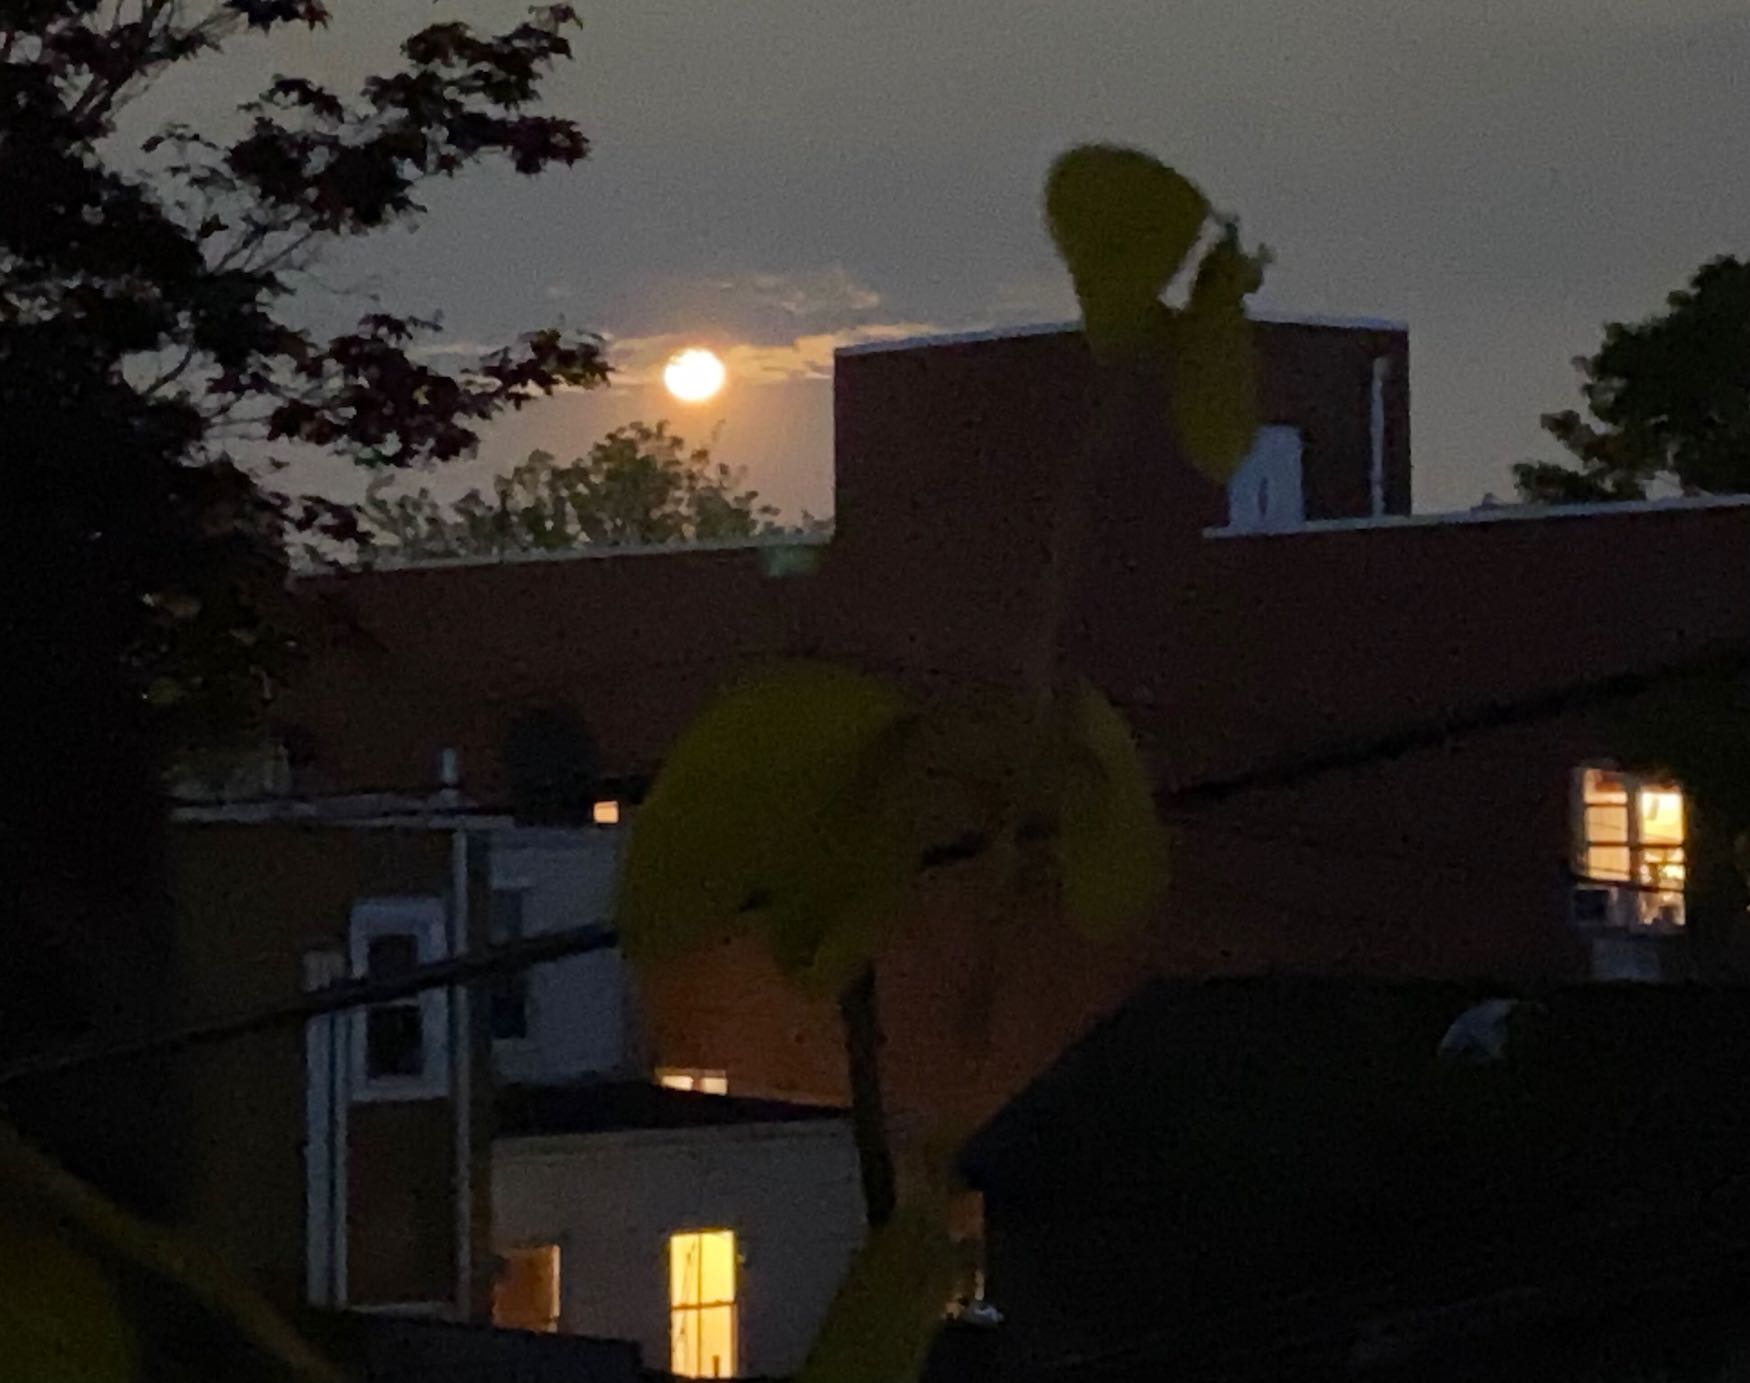 It's the weekend! Number 296, Moon Rising Over Brooklyn Rooftops